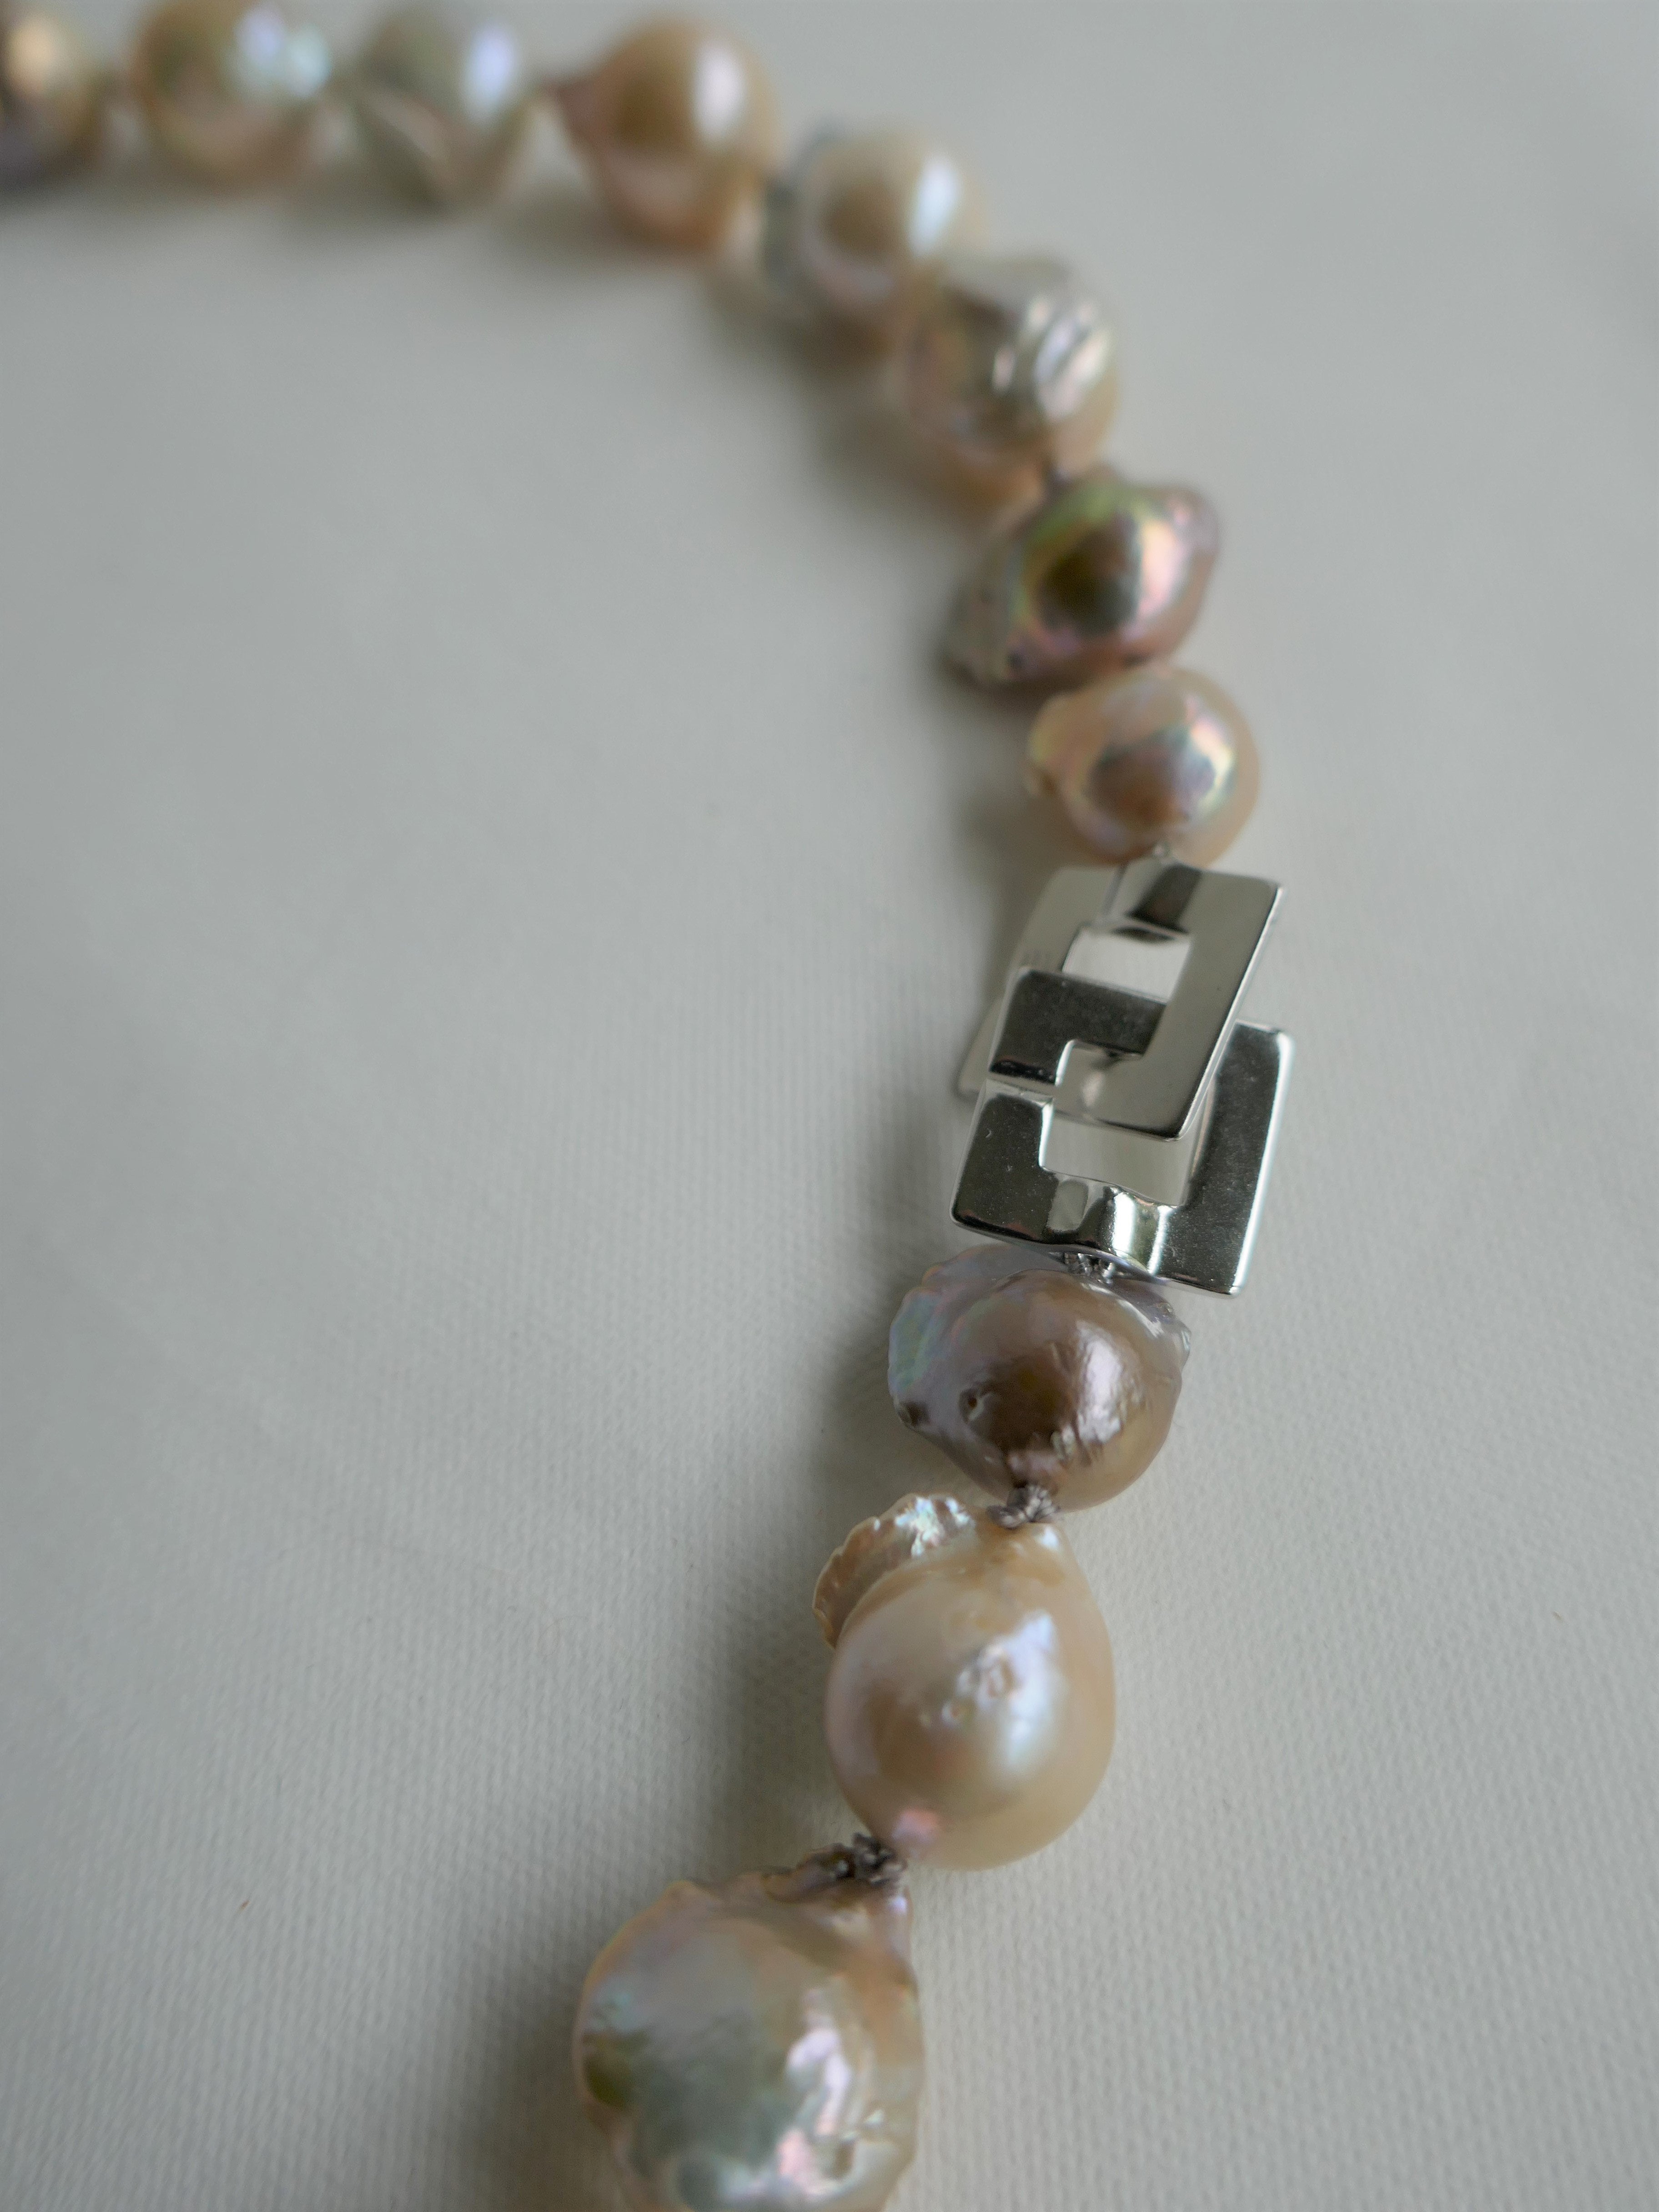 One Strand Natural Tones Baroque Pearls 925 Sterling Silver Clasp